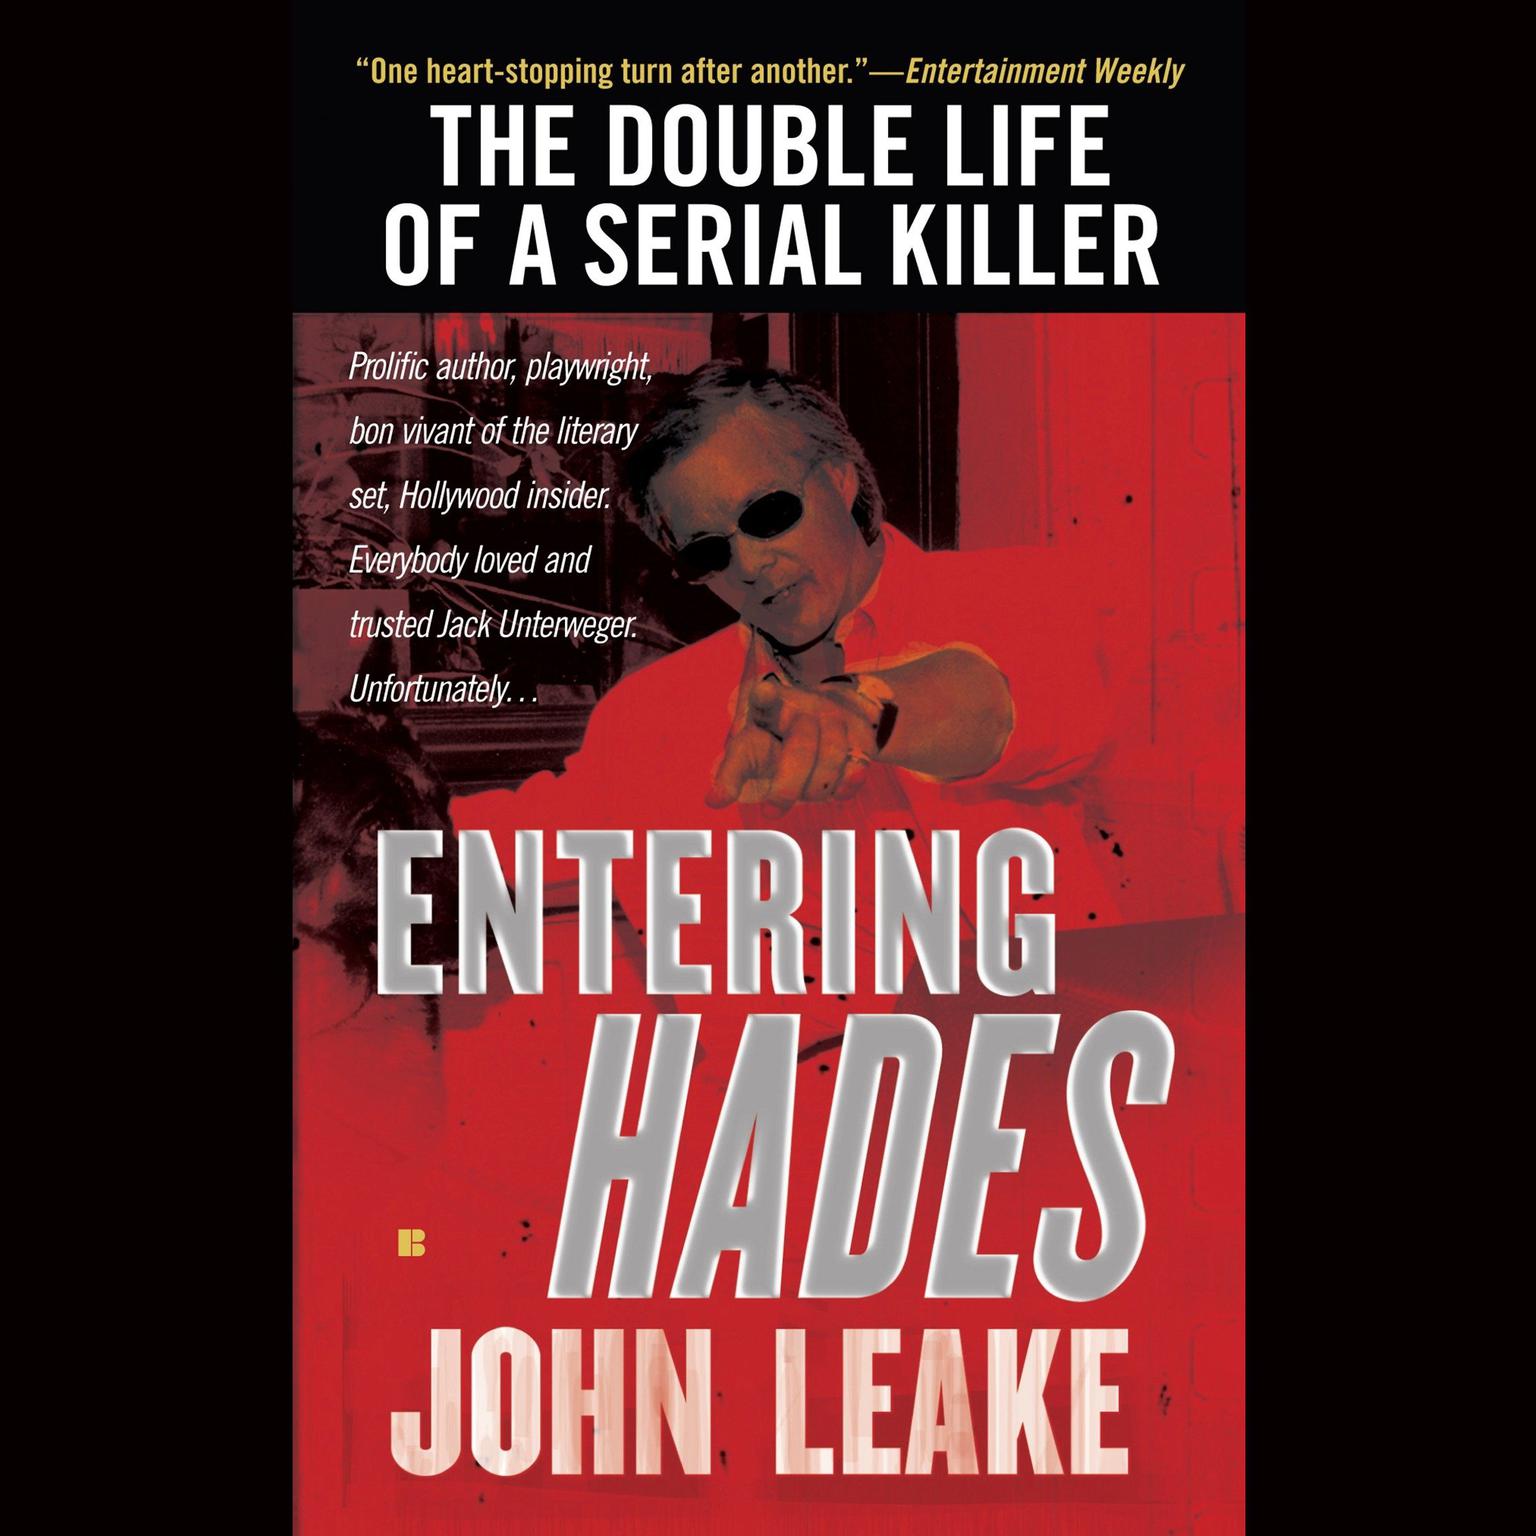 Entering Hades: The Double Life of a Serial Killer Audiobook, by John Leake